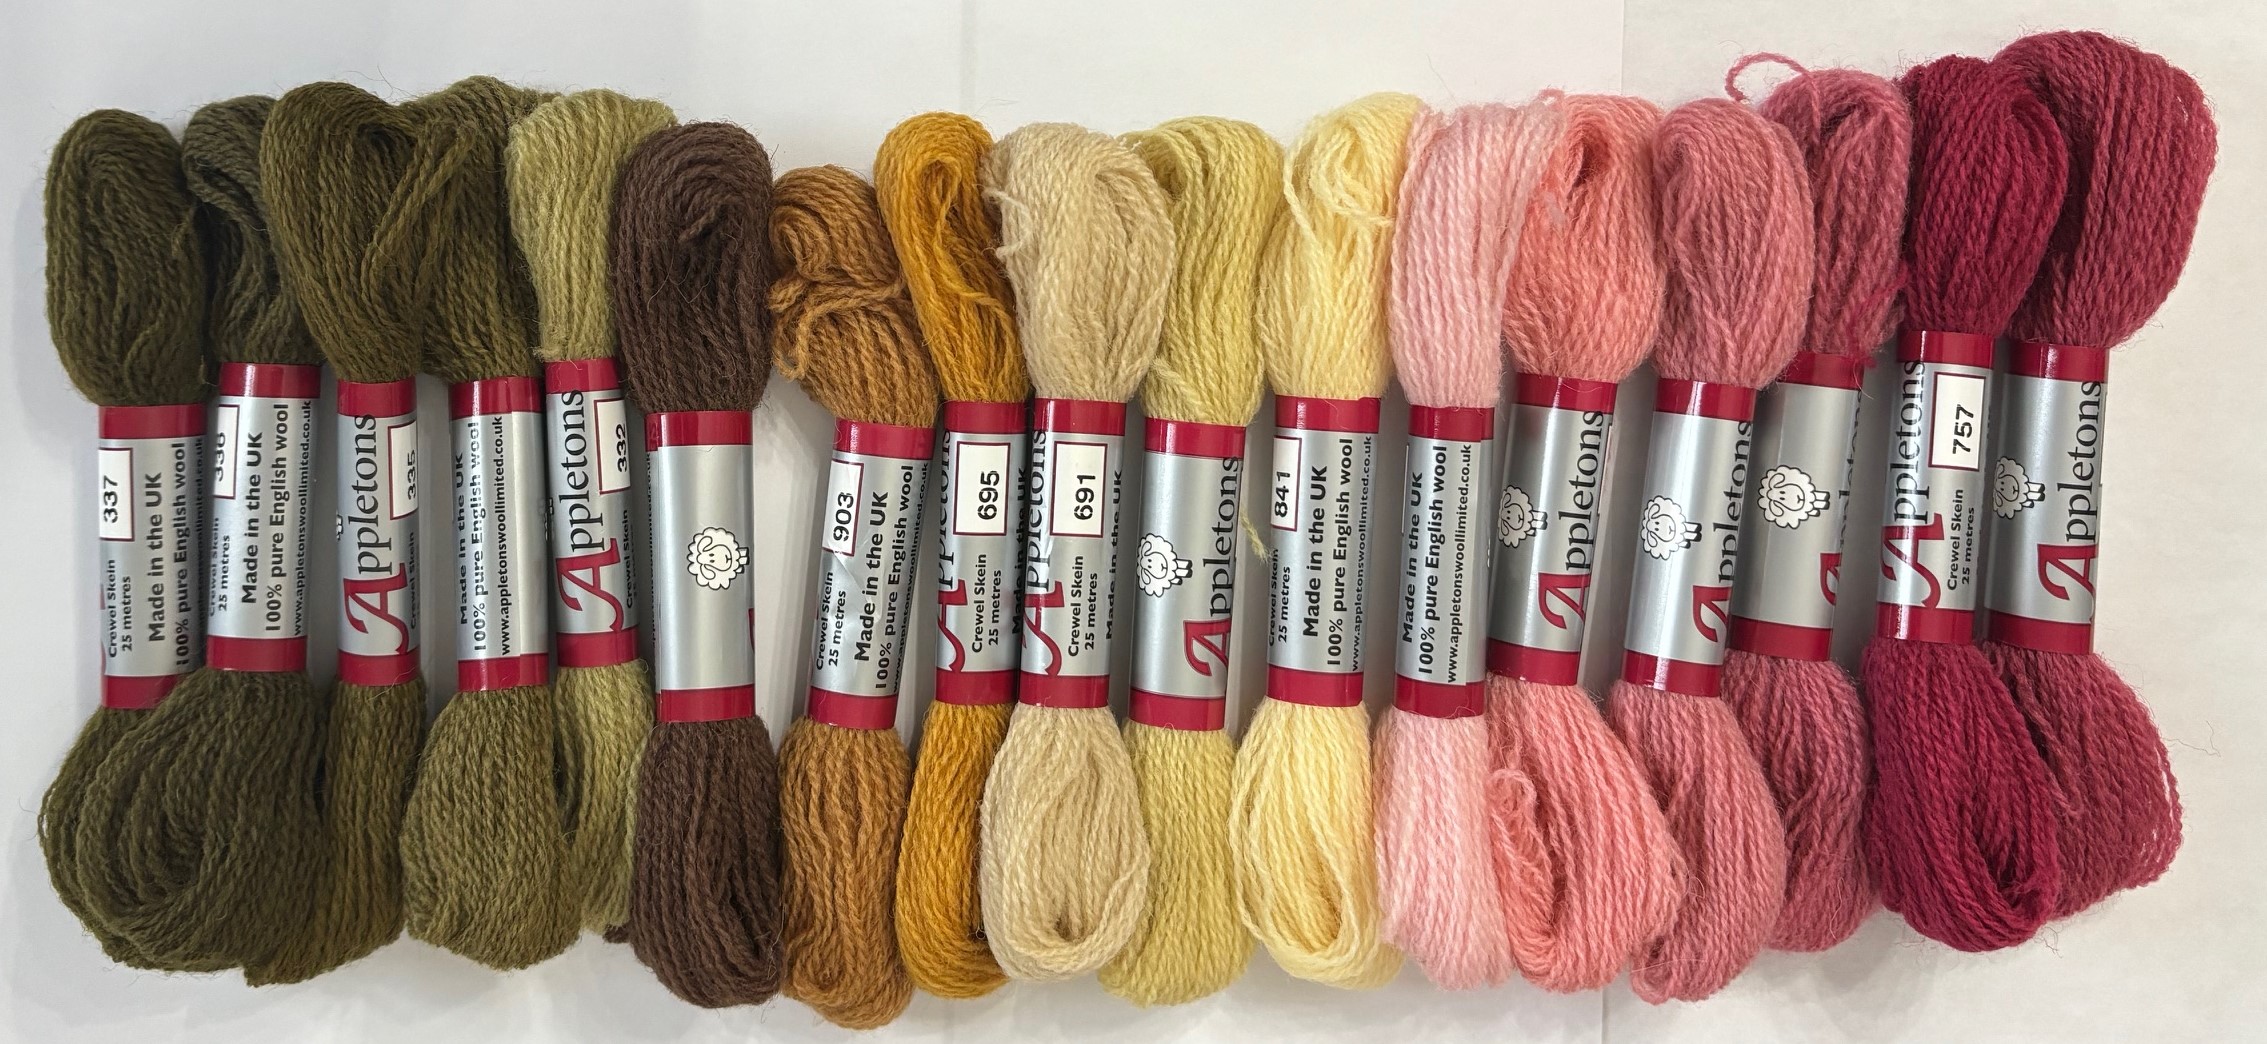 Appleton Thread Pack for Perfect Pink project in Inspirations Issue #121